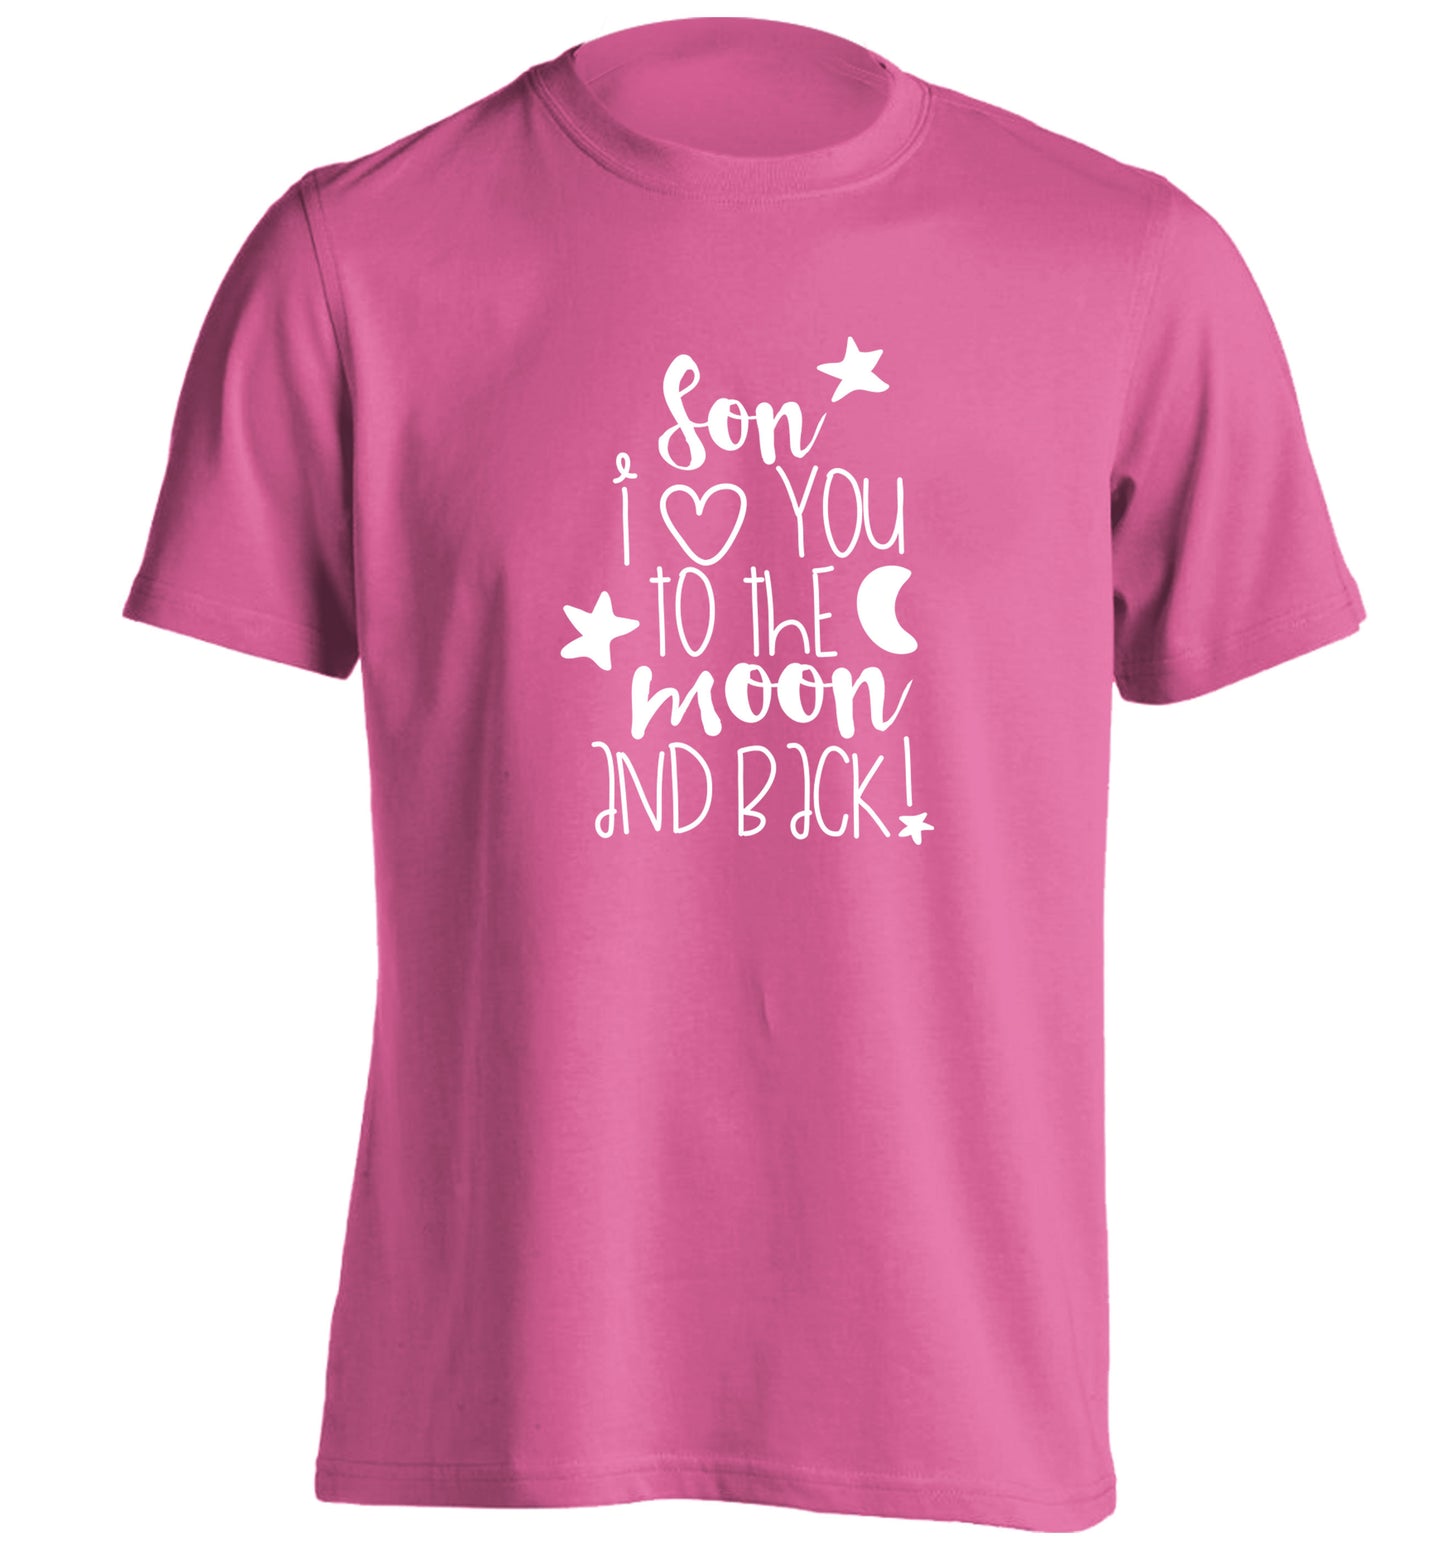 Son I love you to the moon and back adults unisex pink Tshirt 2XL